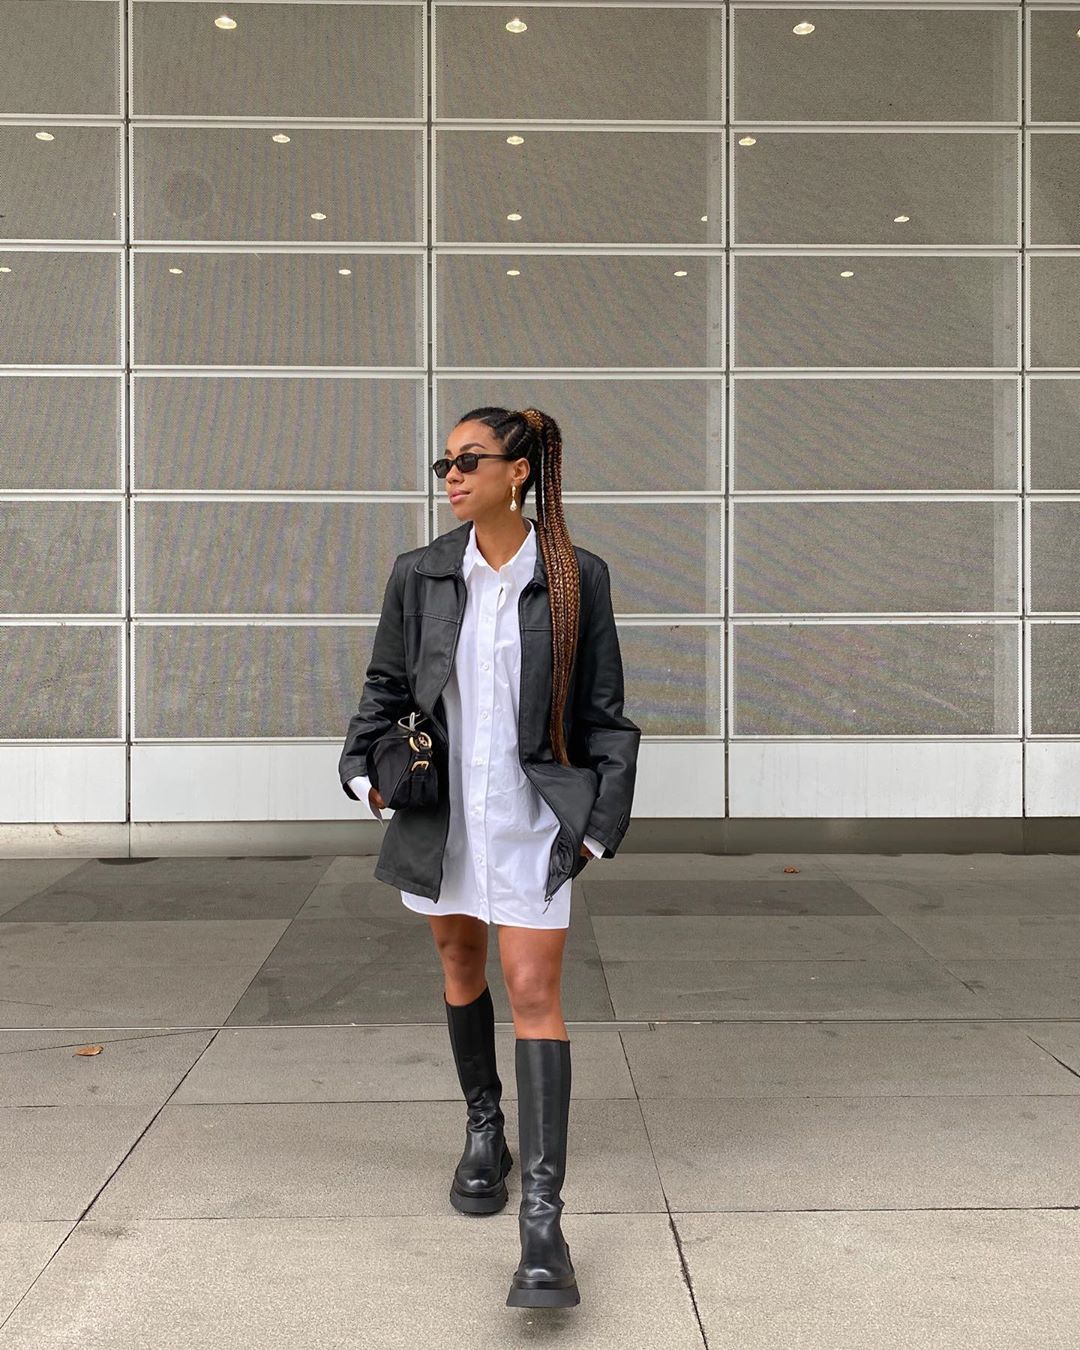 The 20 Best Black Knee-High Boots on the Market | Who What Wear